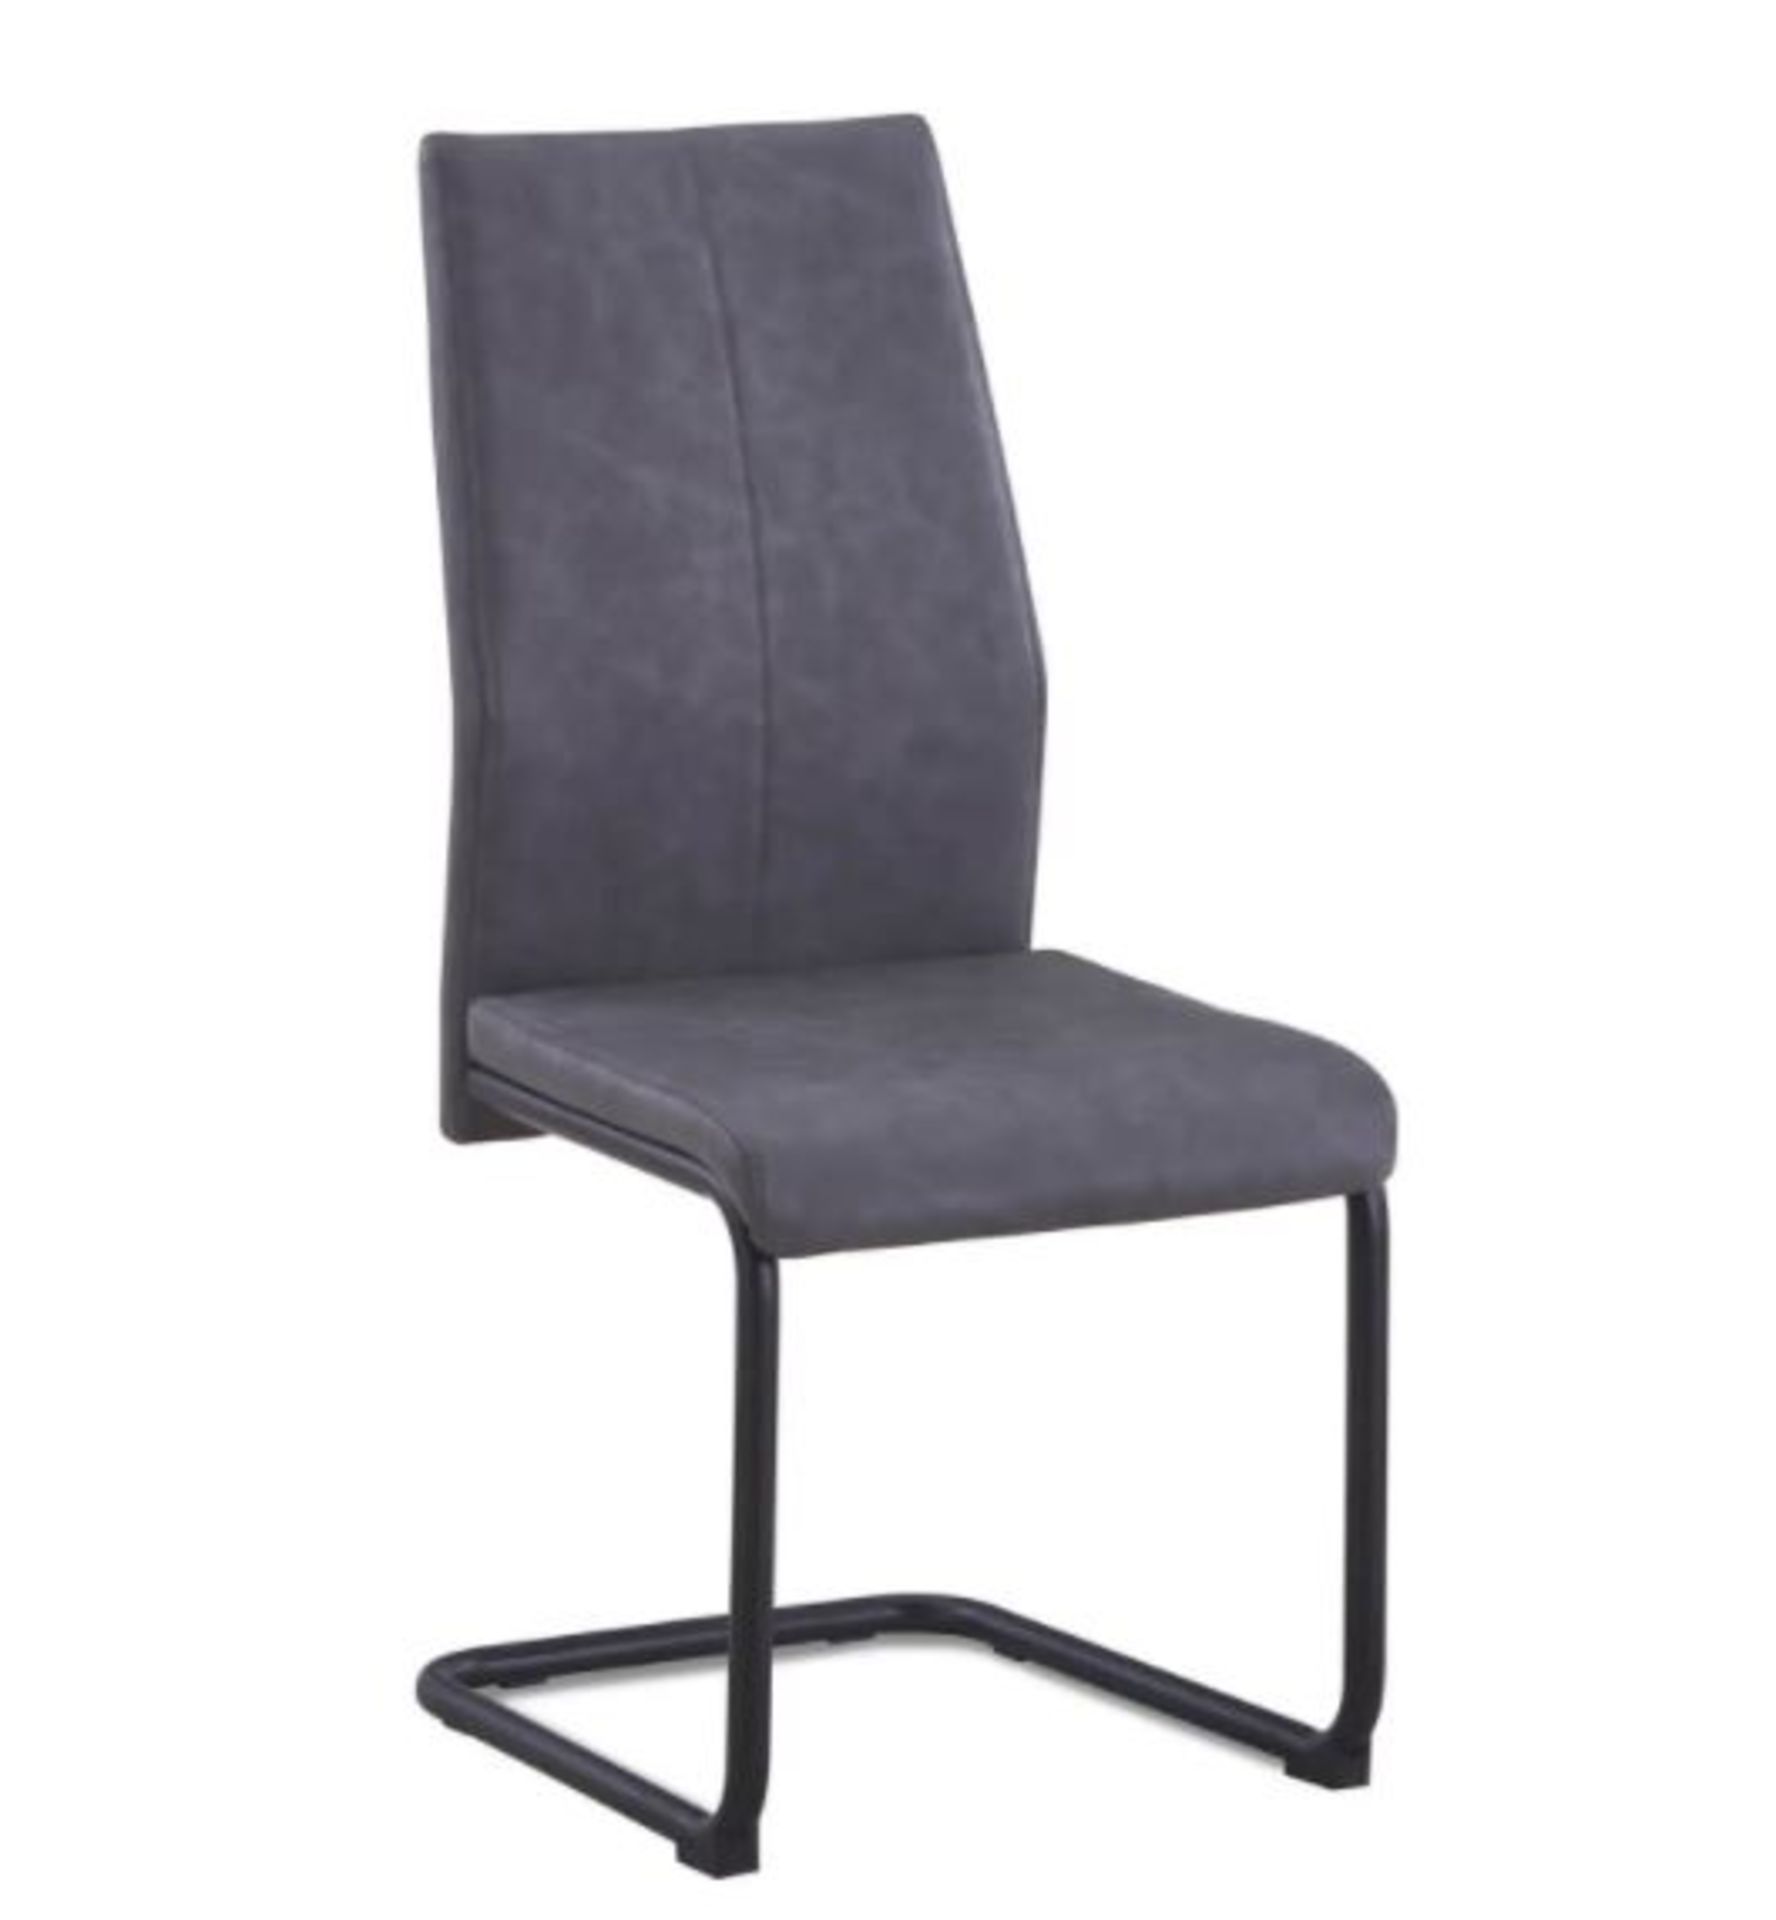 (R10H) 2x Skelby Cantilever Dining Chairs Grey RRP £90. Metal Frame With Black Powder Coat Finish. - Image 2 of 4